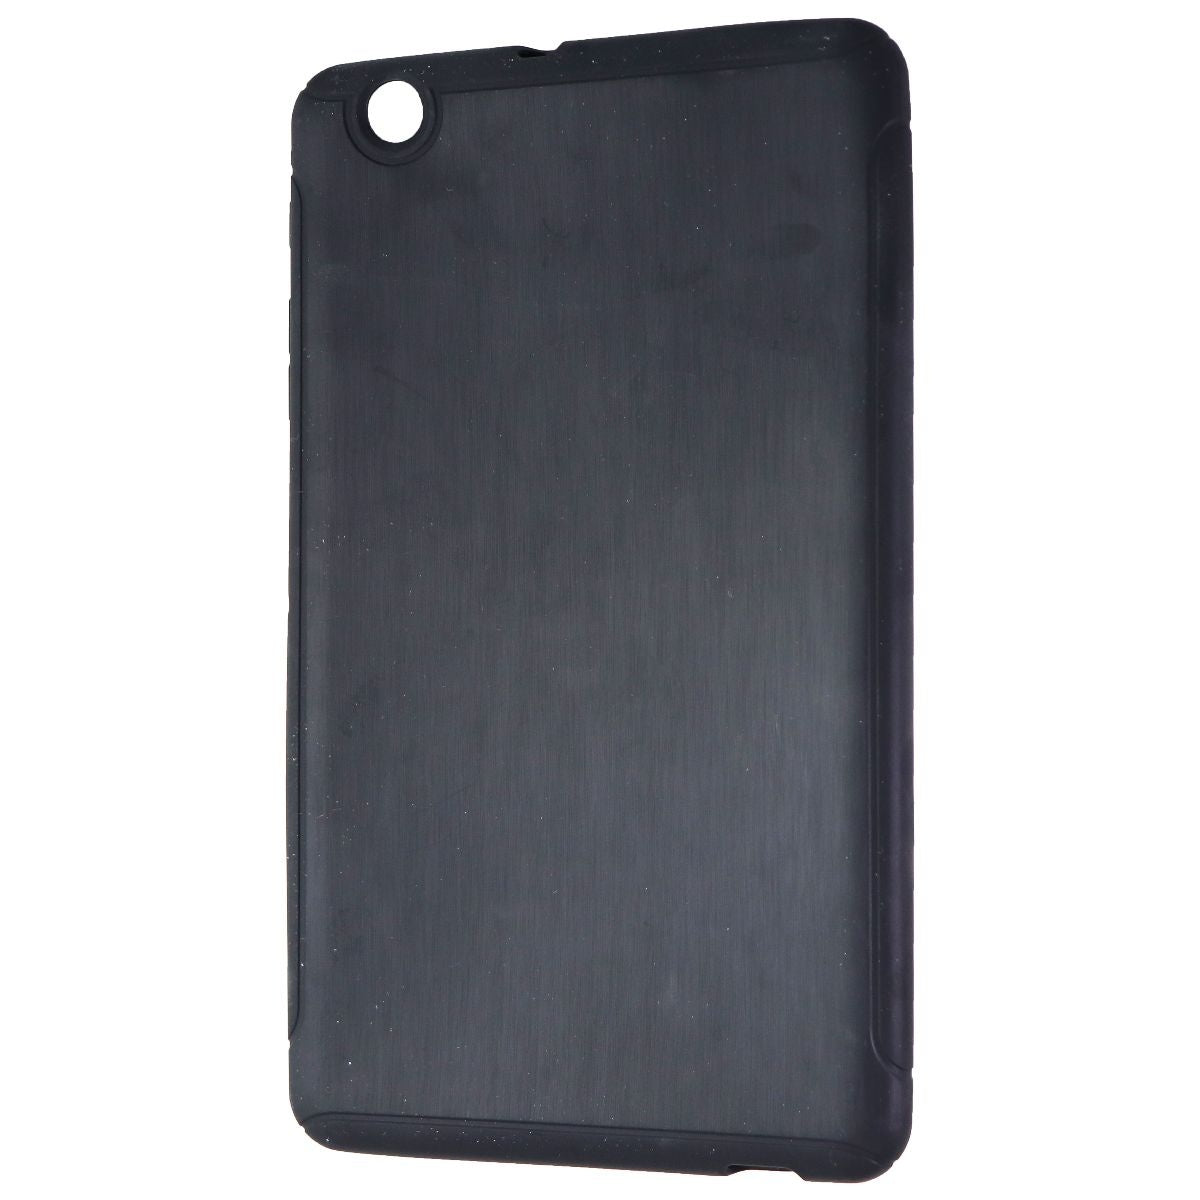 AT&T Two-Tone Shield Rubber Case for AT&T Trek 2 HD - Black iPad/Tablet Accessories - Cases, Covers, Keyboard Folios AT&T    - Simple Cell Bulk Wholesale Pricing - USA Seller